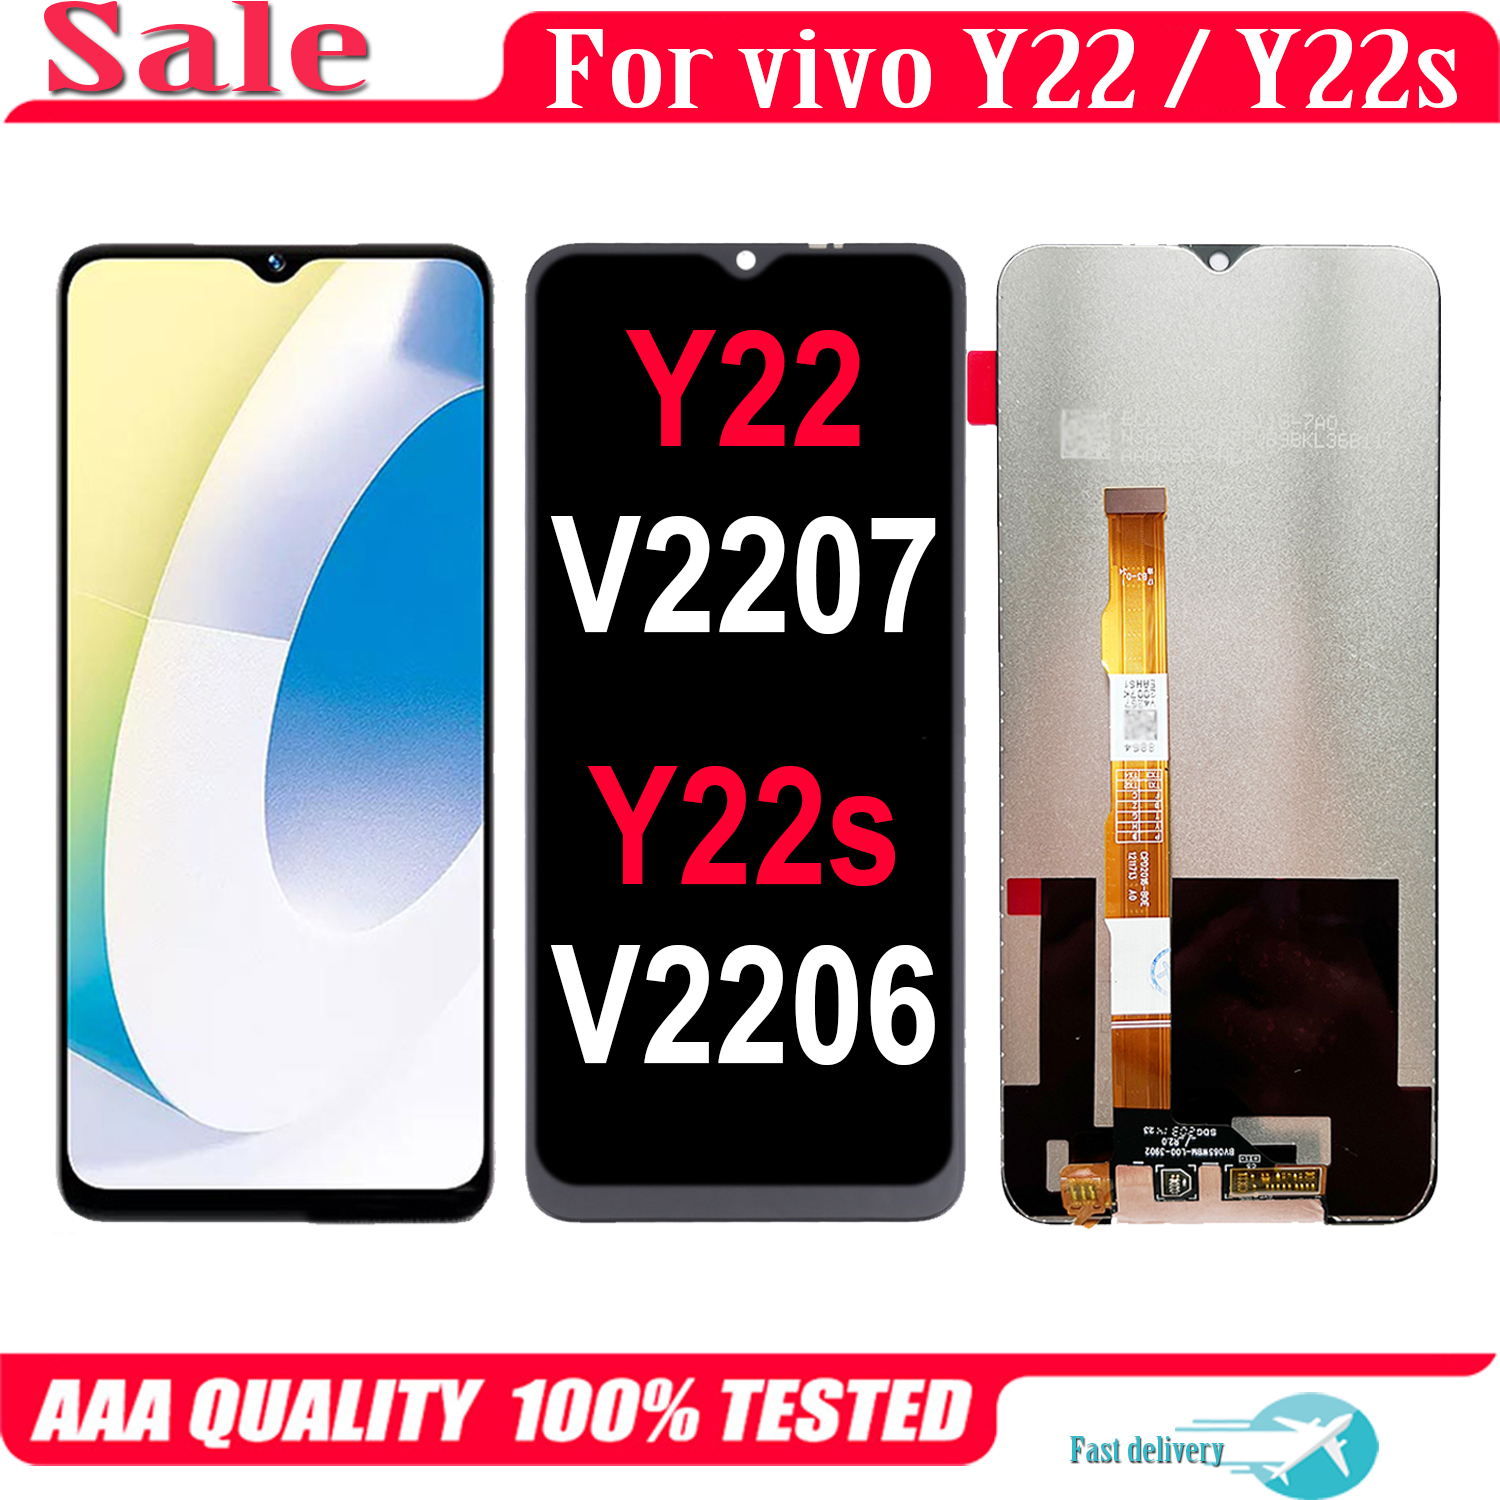 Original-6-55-For-Vivo-Y22-Y22s-V2207-V2206-LCD-Display-Touch-Screen-Replacement-Digitizer-Assembly